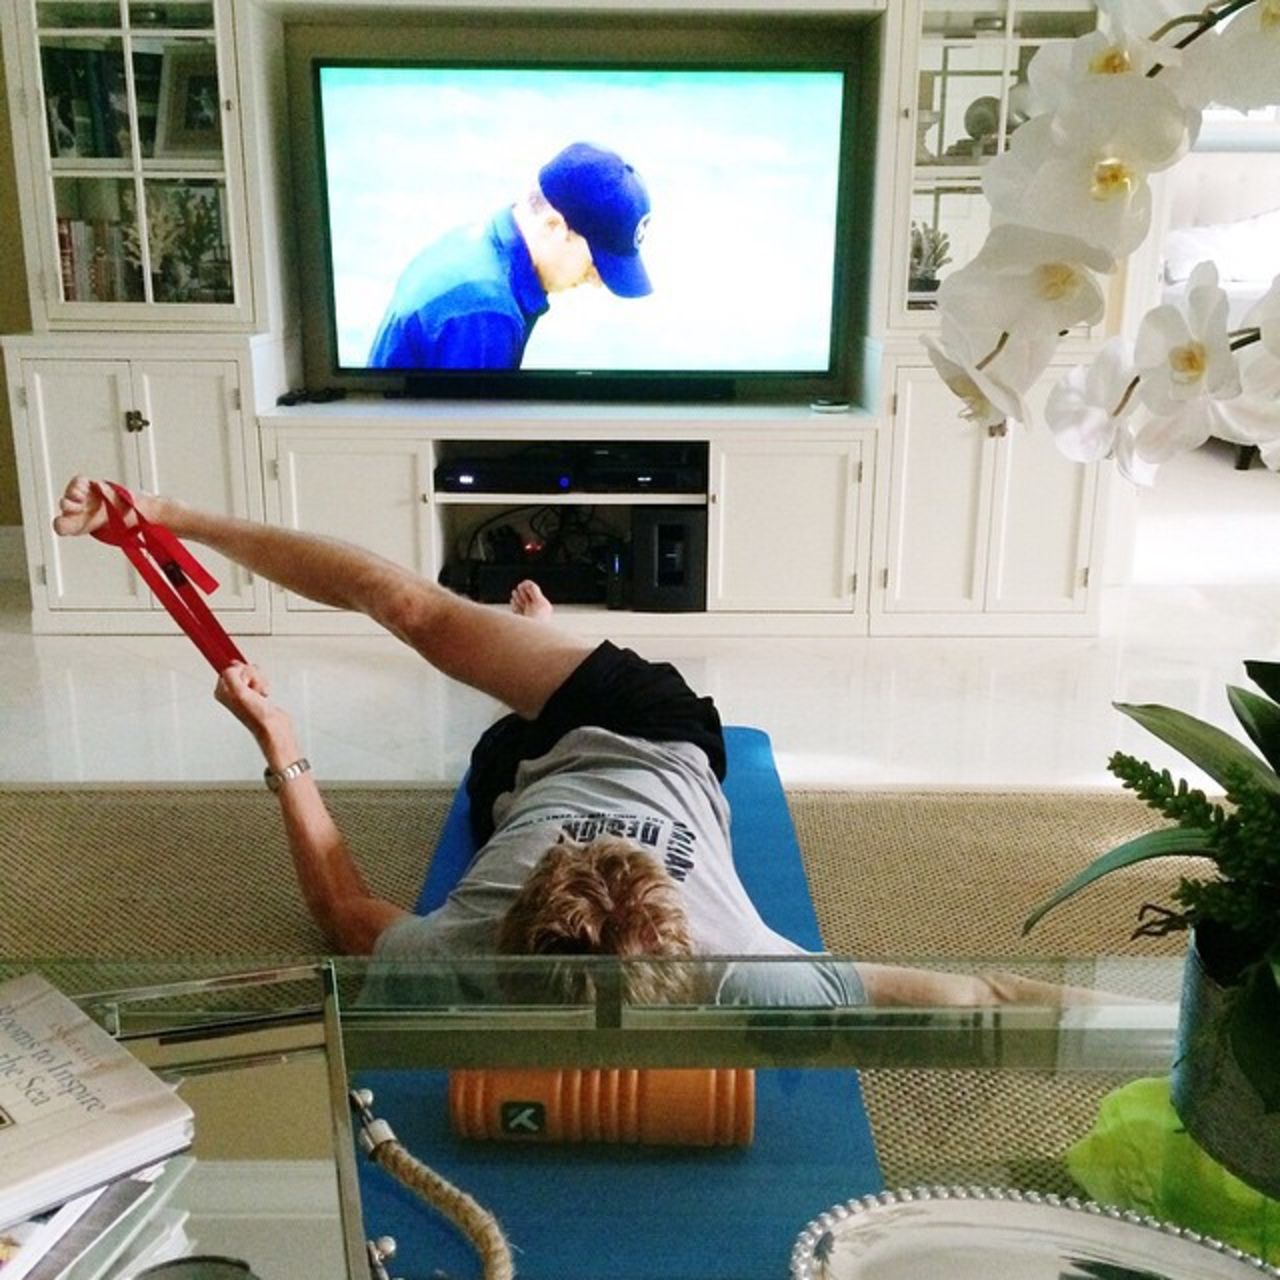 At home in Miami, Kevin works out while matching the Masters golf tournament on TV, in this snap also from Kelsey's Instagram account.